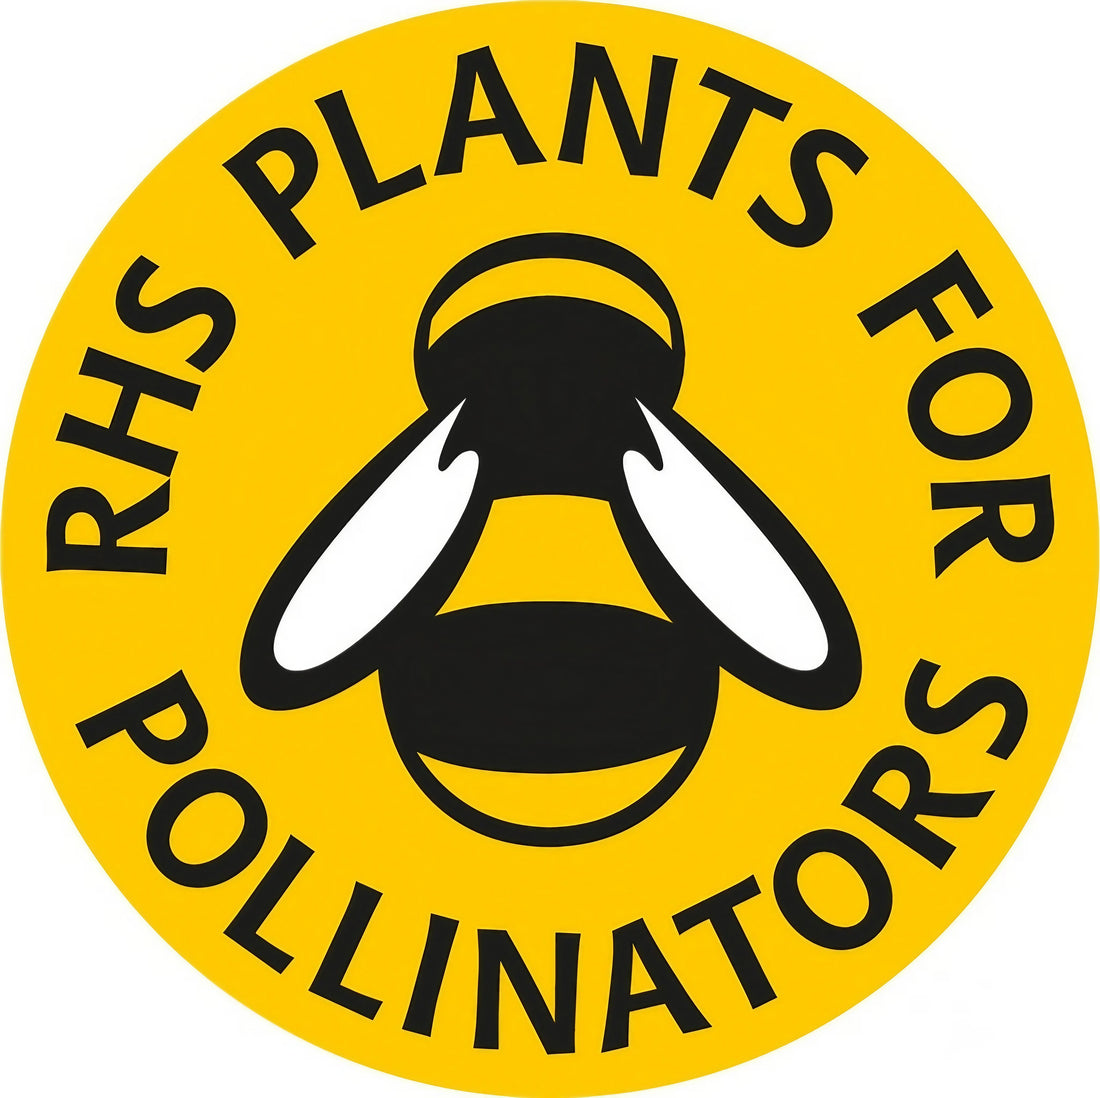 Logo of RHS Plants for Pollinators indicating suitability for attracting pollinators